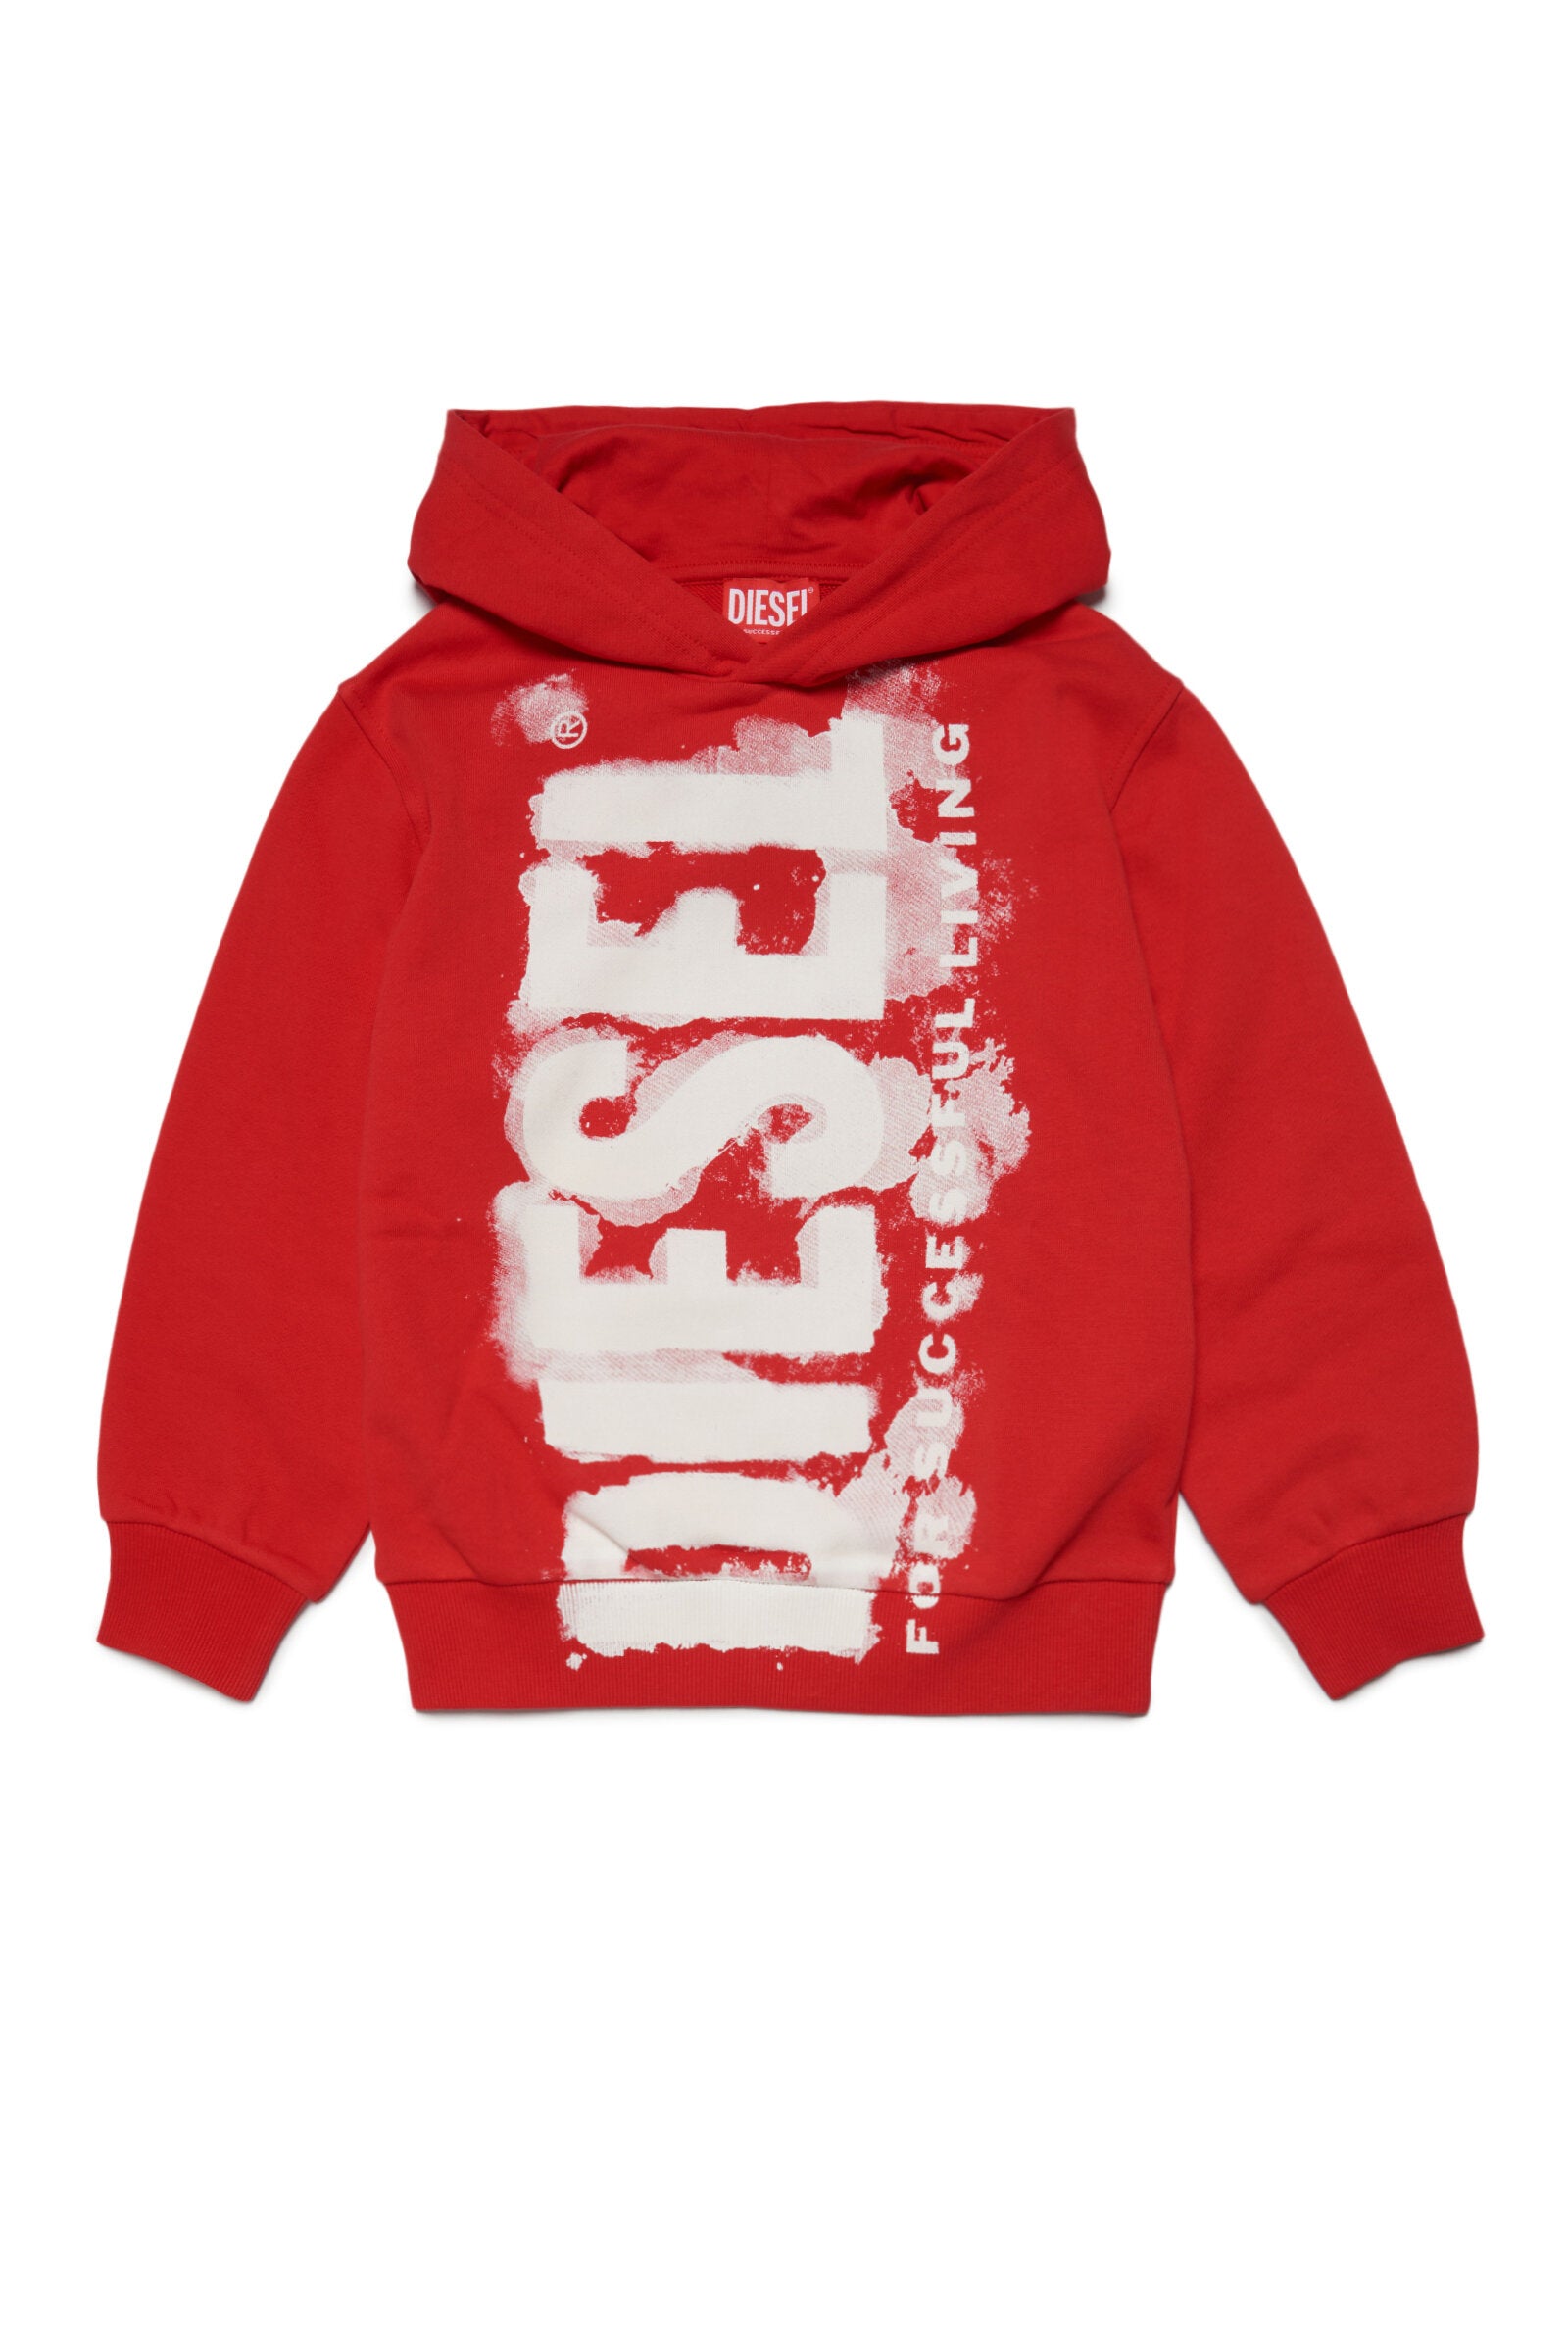 Brave children | red logo with watercolour Kid effect for hooded Diesel sweatshirt